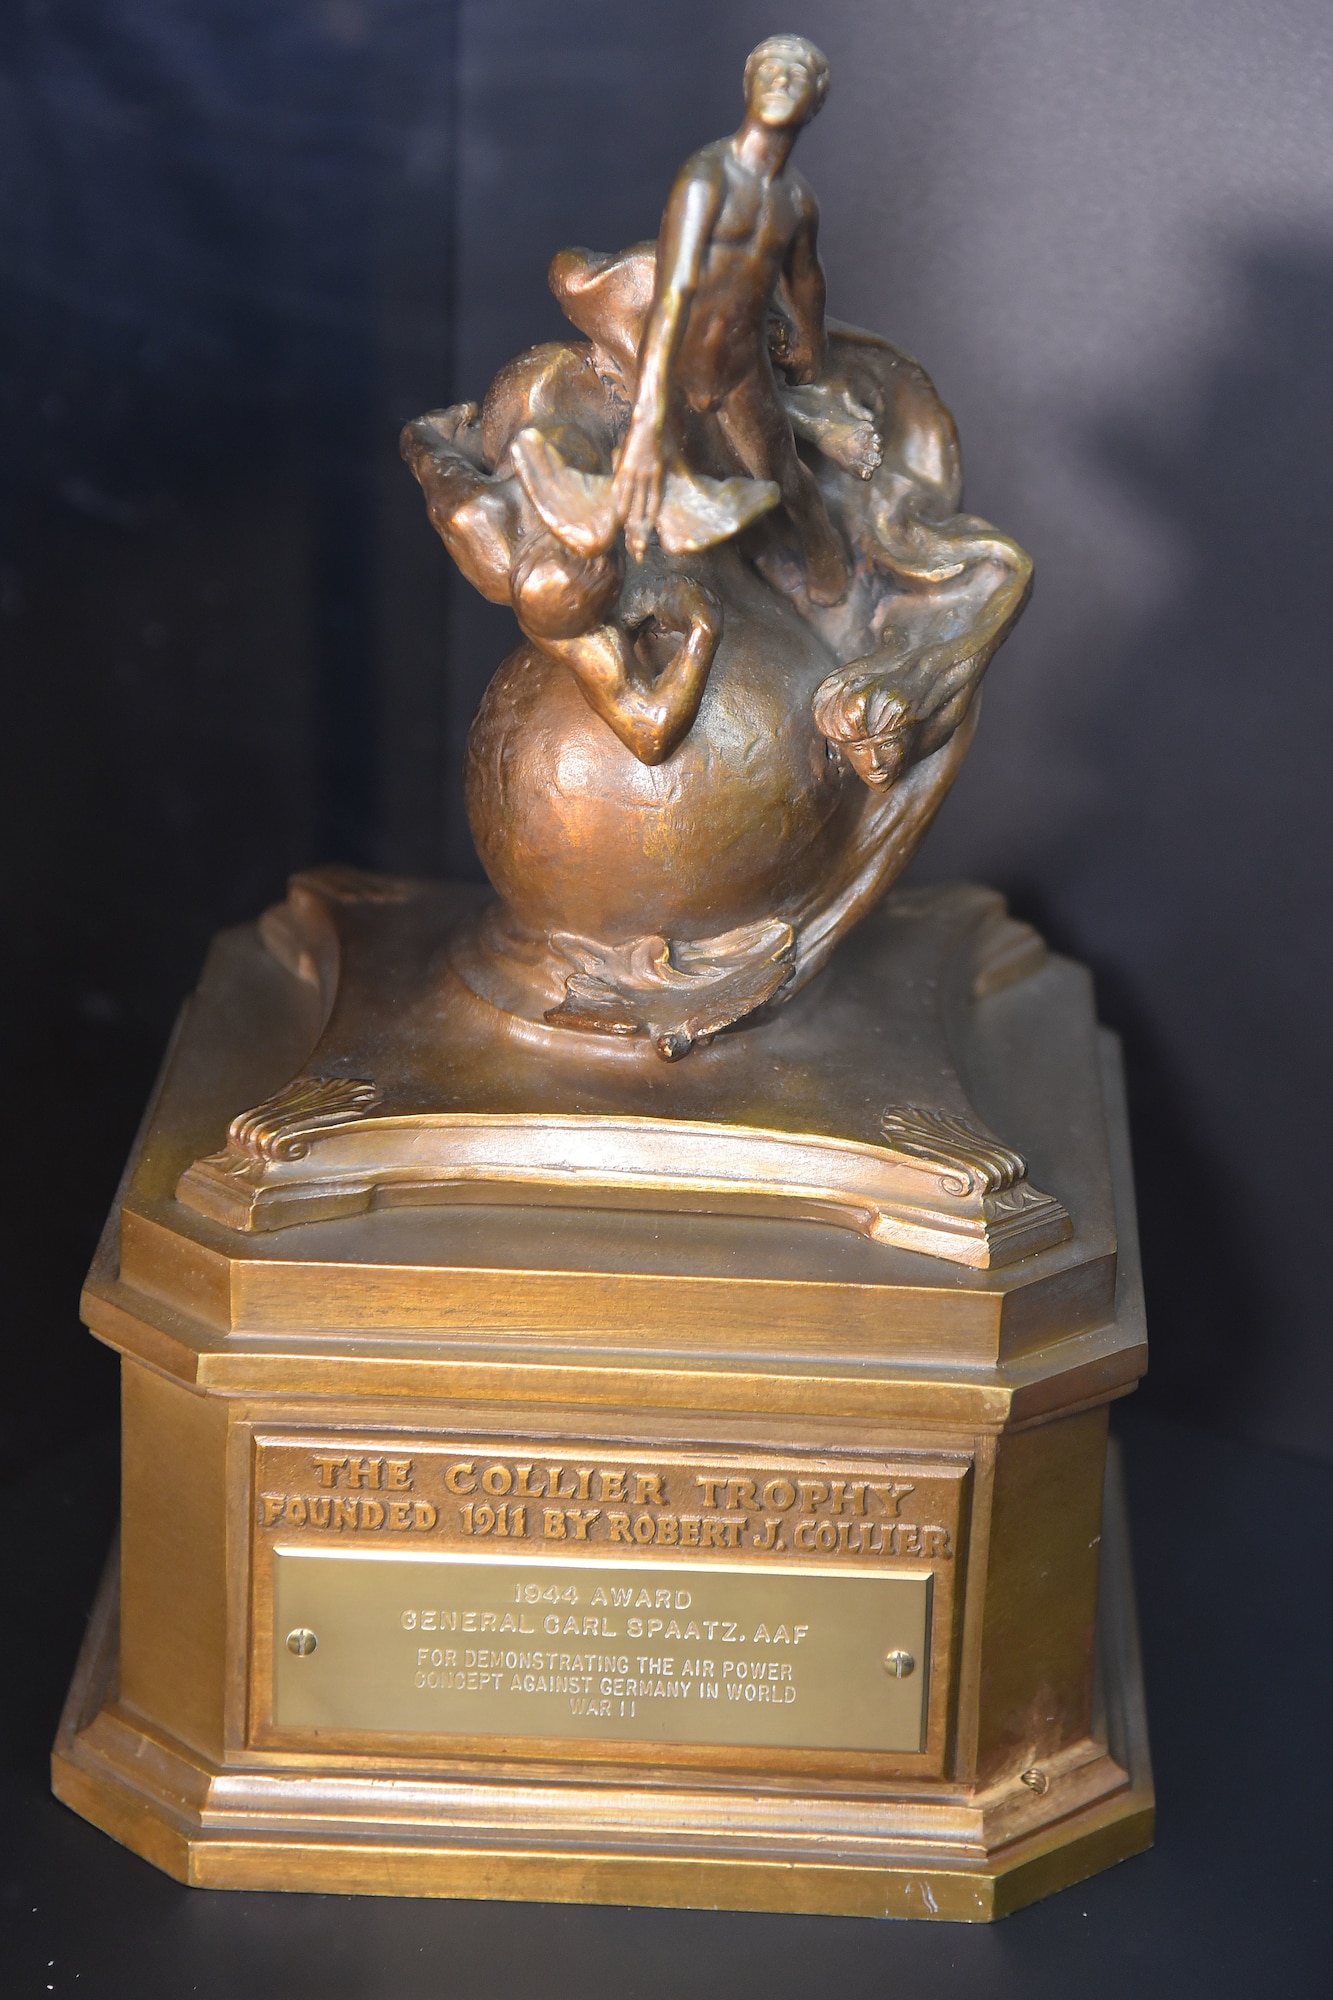 The 1944 Collier Trophy awarded to Carl A. Spaatz for "demonstrating the air power concept through employment of American aviation in the war against Germany." The Collier Trophy is awarded annually for significant achievement in the advancement of aviation.(U.S. Air Force photo)